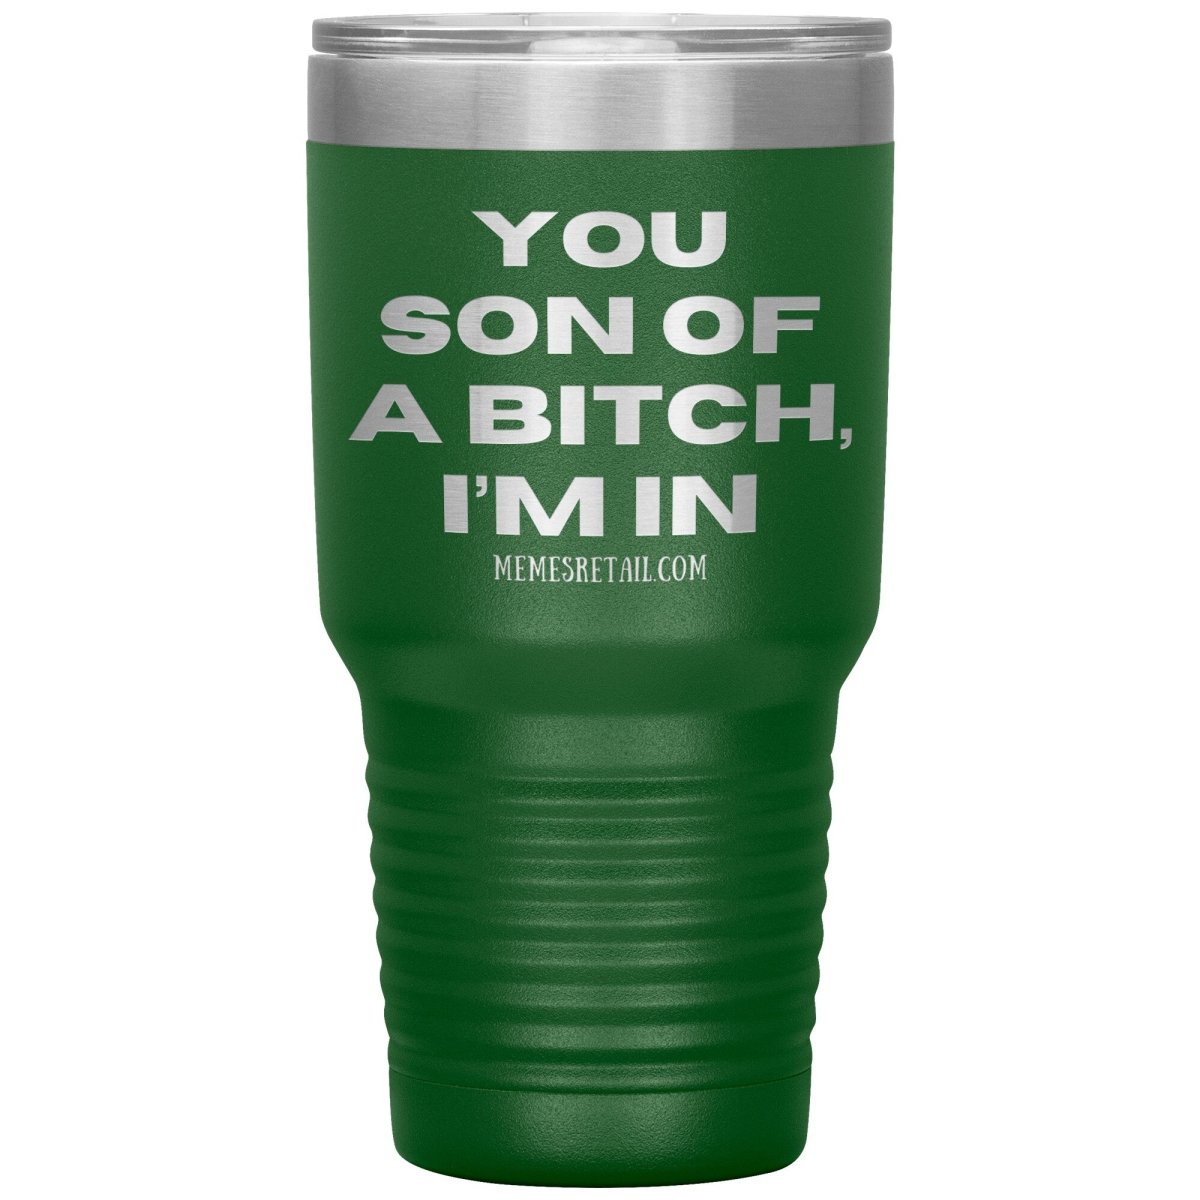 You son of a bitch, I’m in Tumblers, 30oz Insulated Tumbler / Green - MemesRetail.com